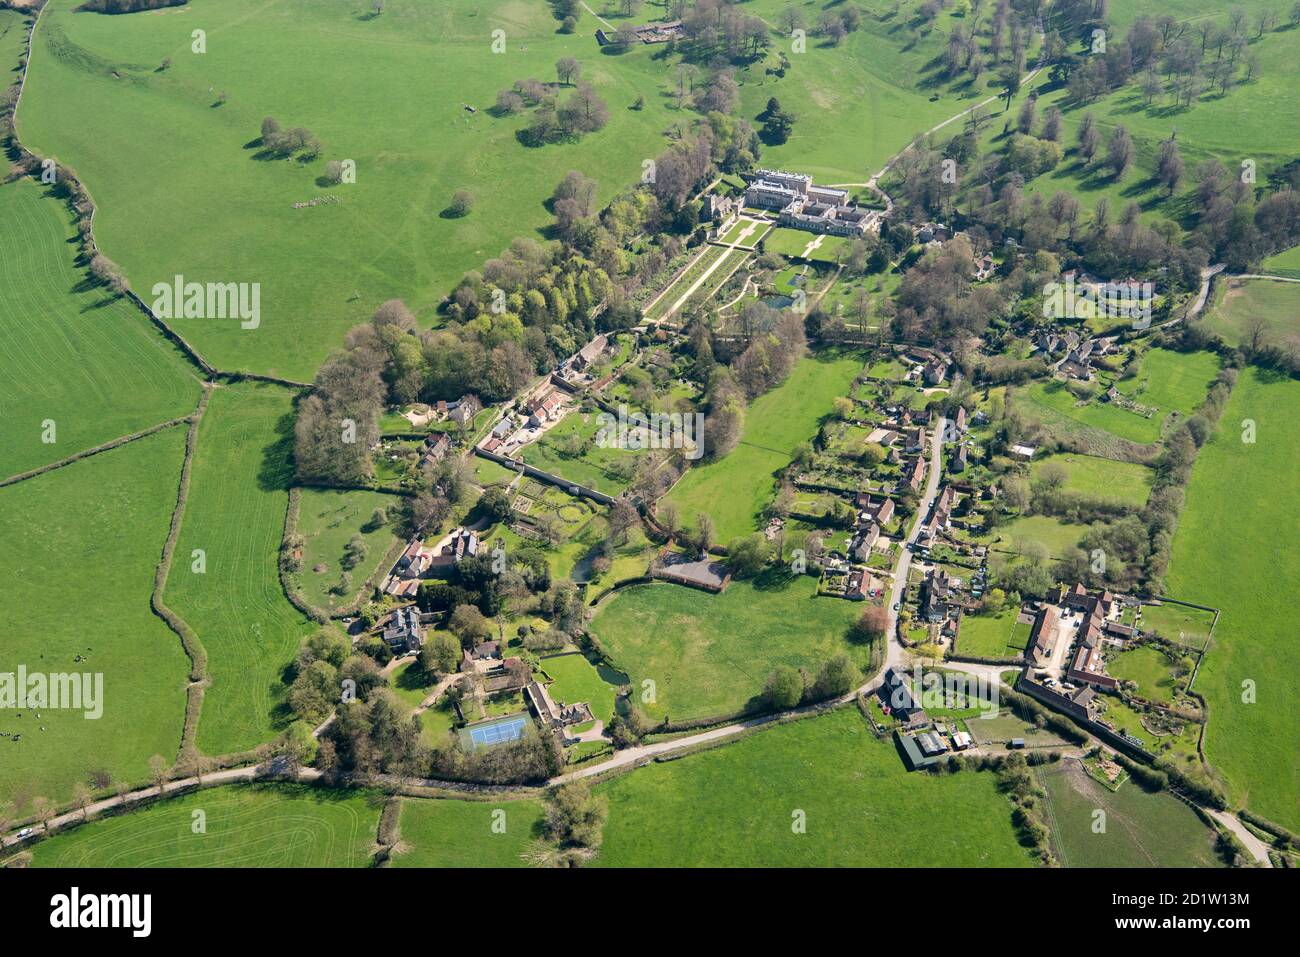 Dyrham Park Country House and Grounds, Deer Park, Dyrham Village, South Gloucestershire, 2018, UK. Aerial view. Stock Photo